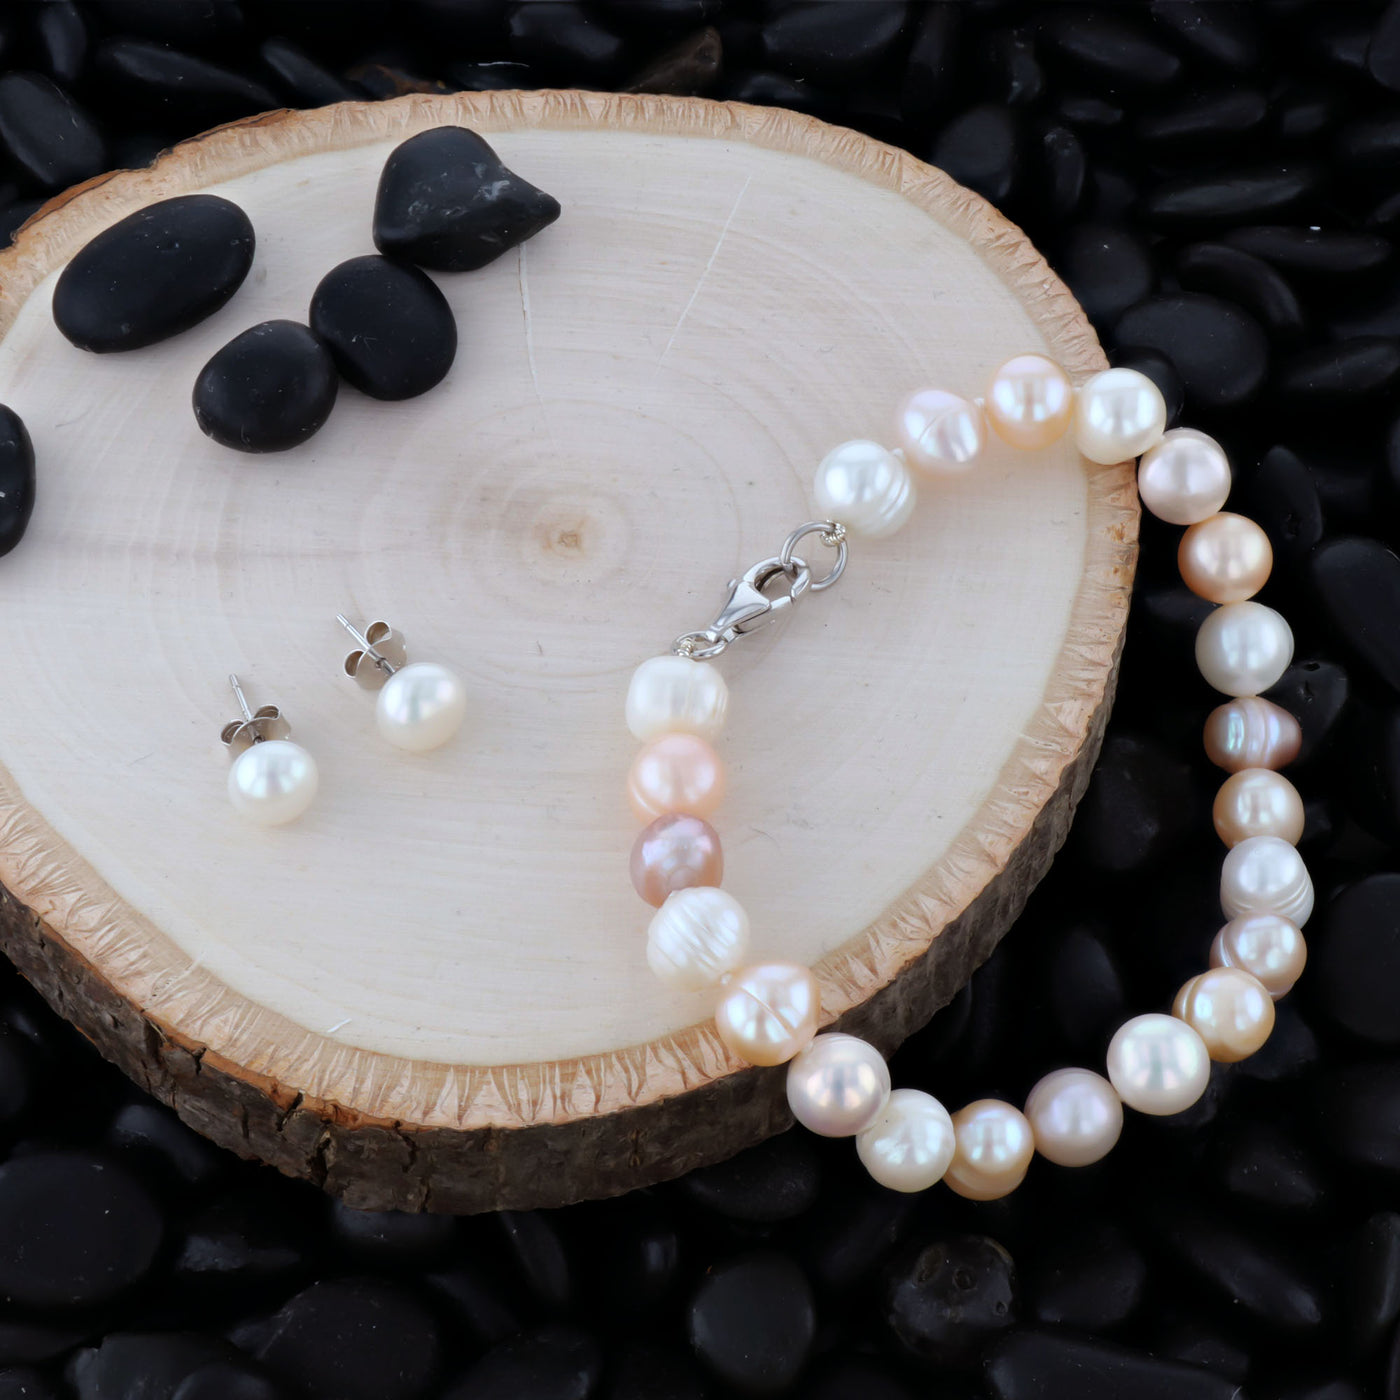 Three Piece Set: Multi Color Fresh Water Potato Pearl Necklace With Matching Bracelet And Earrings.